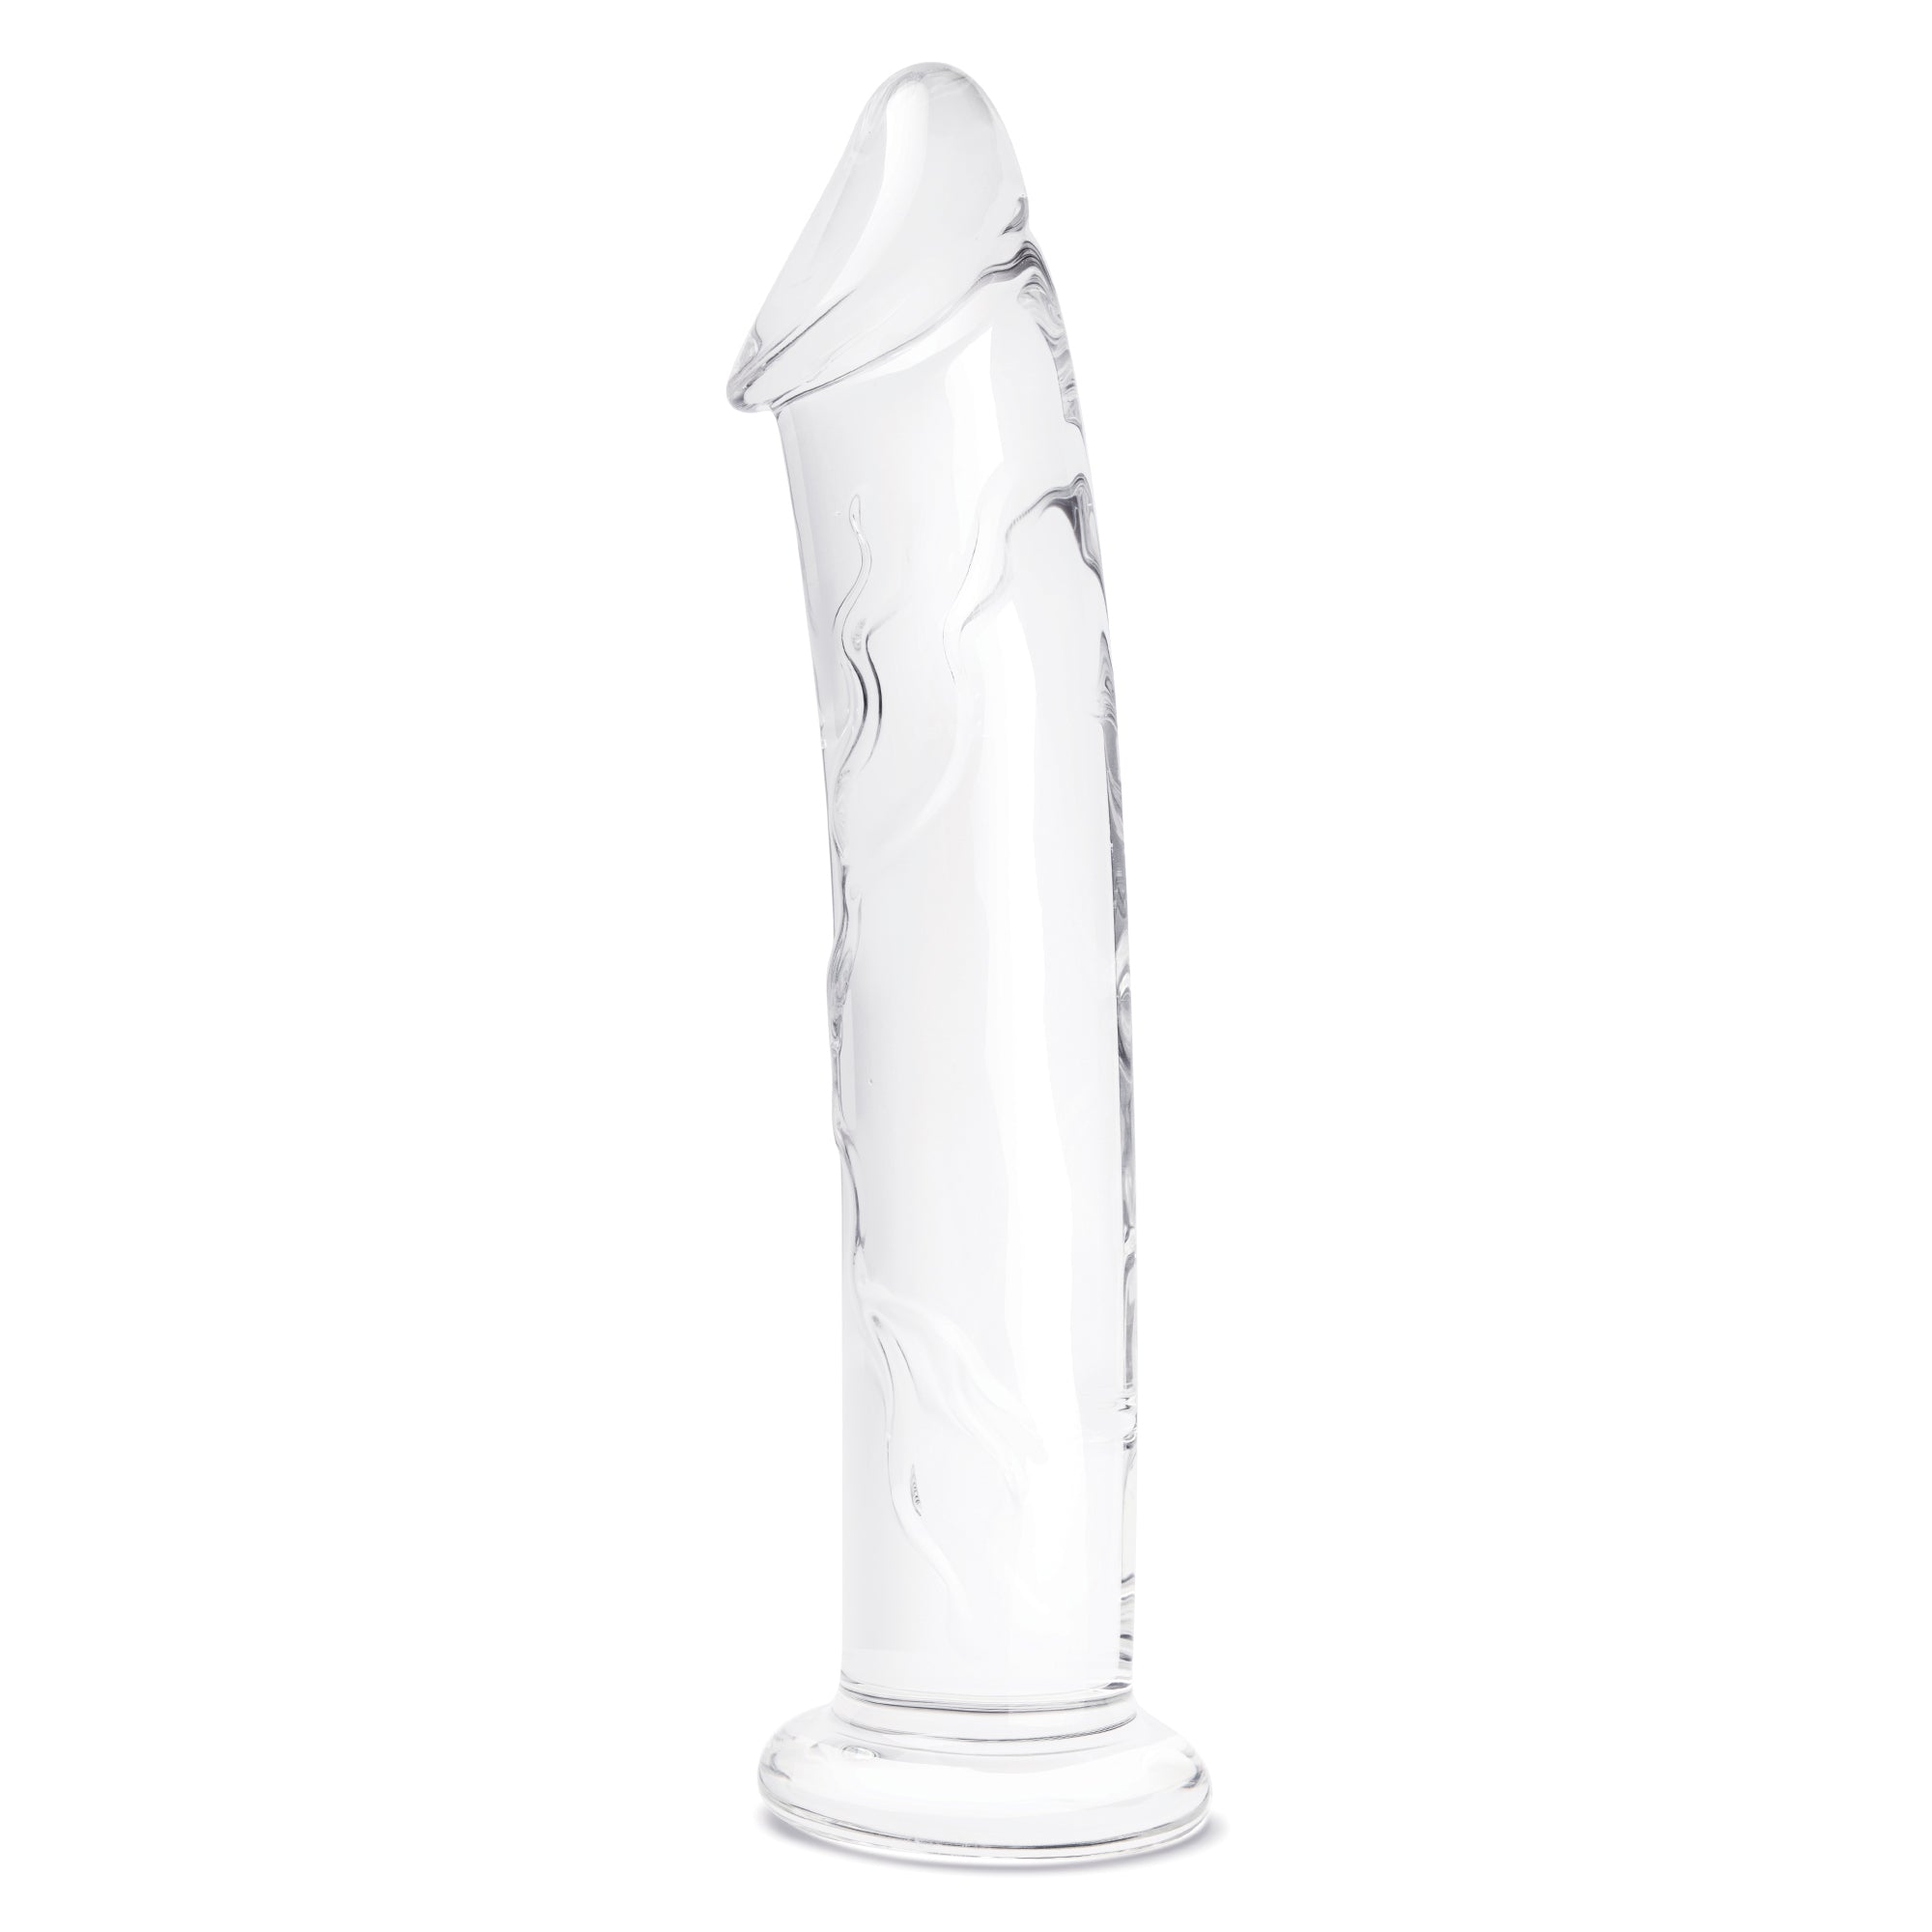 12" Glass Dildo With Veins & Flat Base